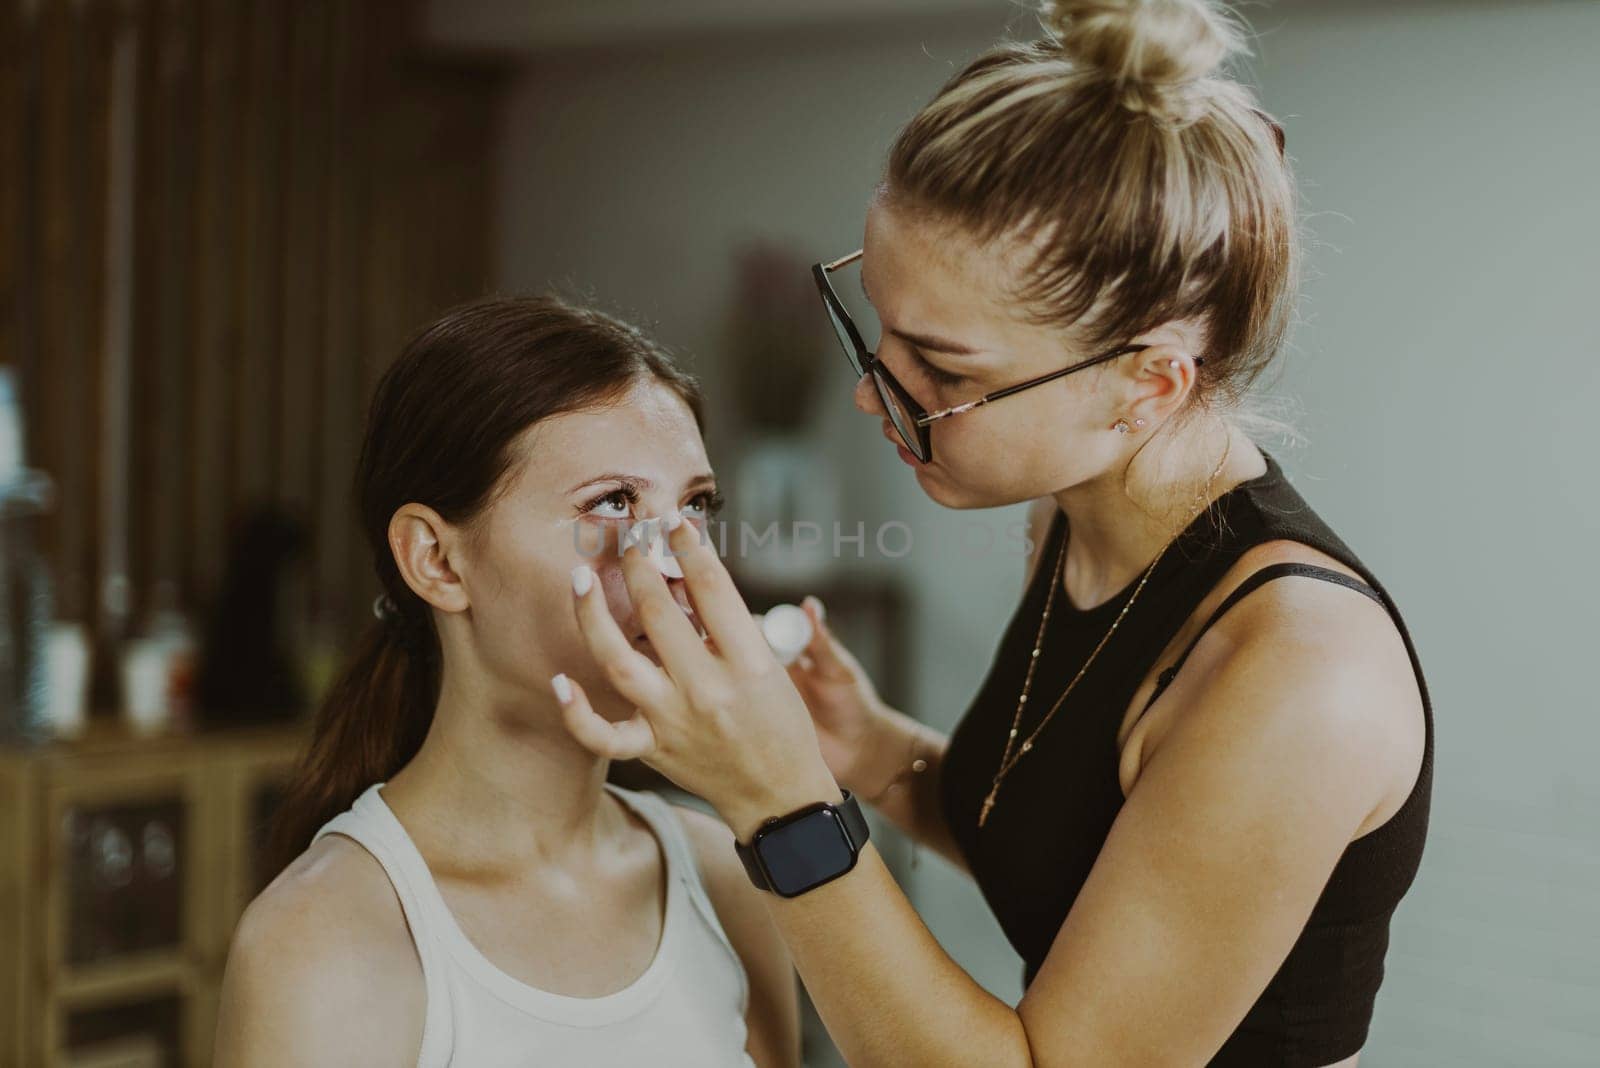 One young handsome Caucasian makeup artist applies a moisturizing medicinal liquid to the lower eyelid under the eye of a girl sitting in a chair early in the morning in a beauty salon, close-up side view.Step by step.